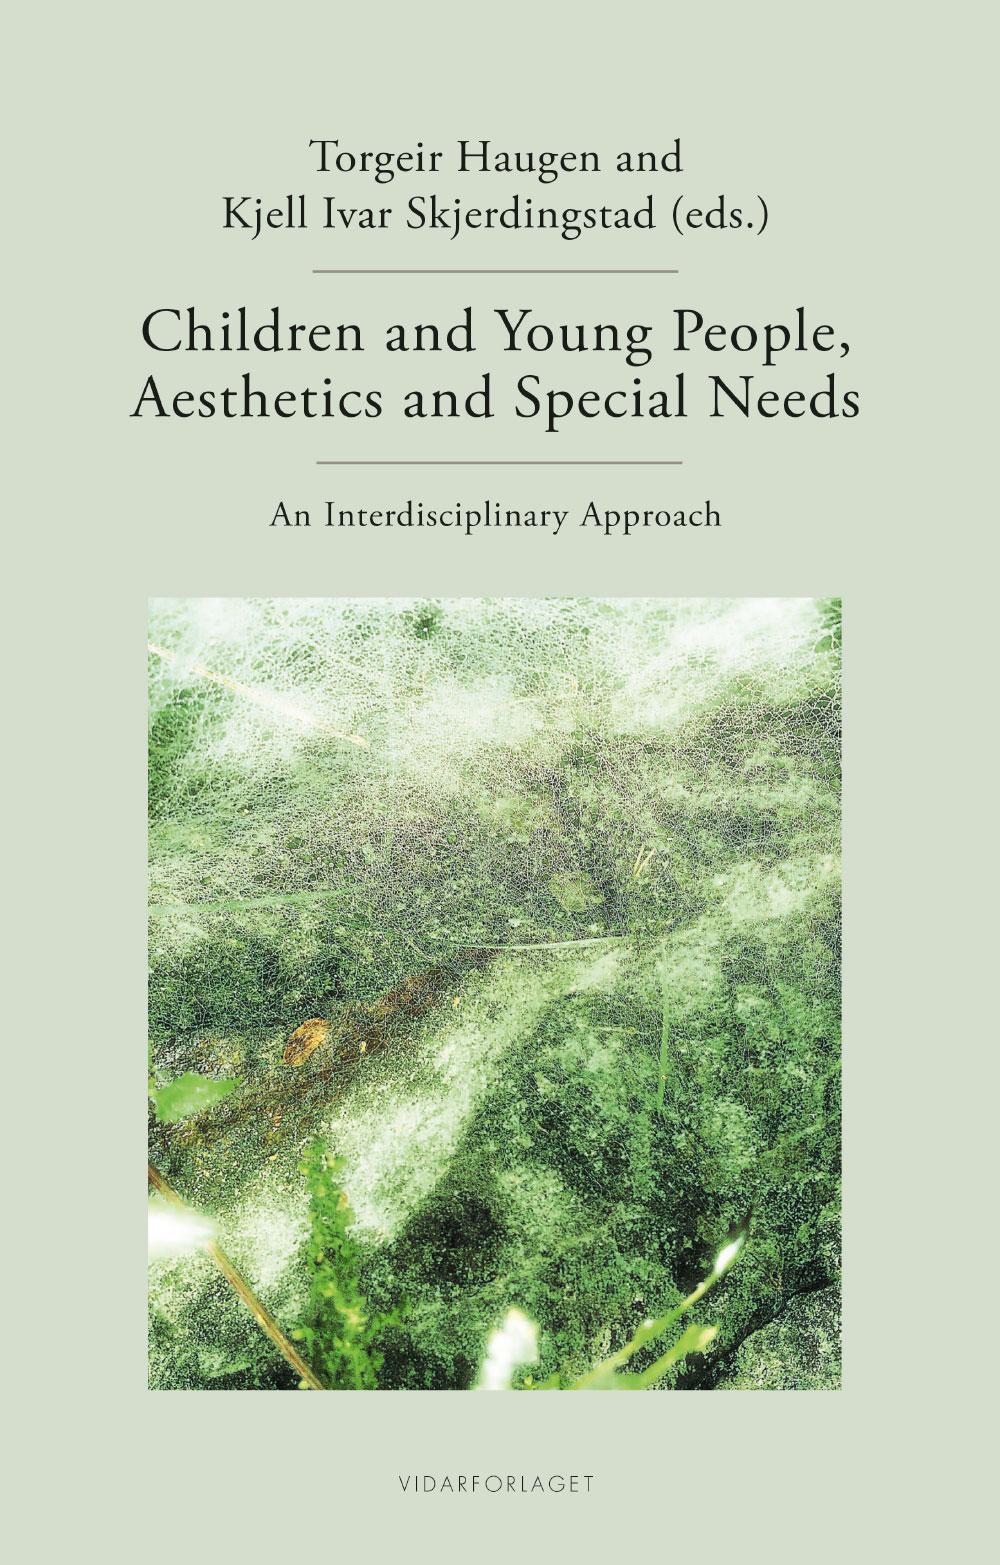 Children and young people, aesthetics and special needs: an  interdisciplinary approach